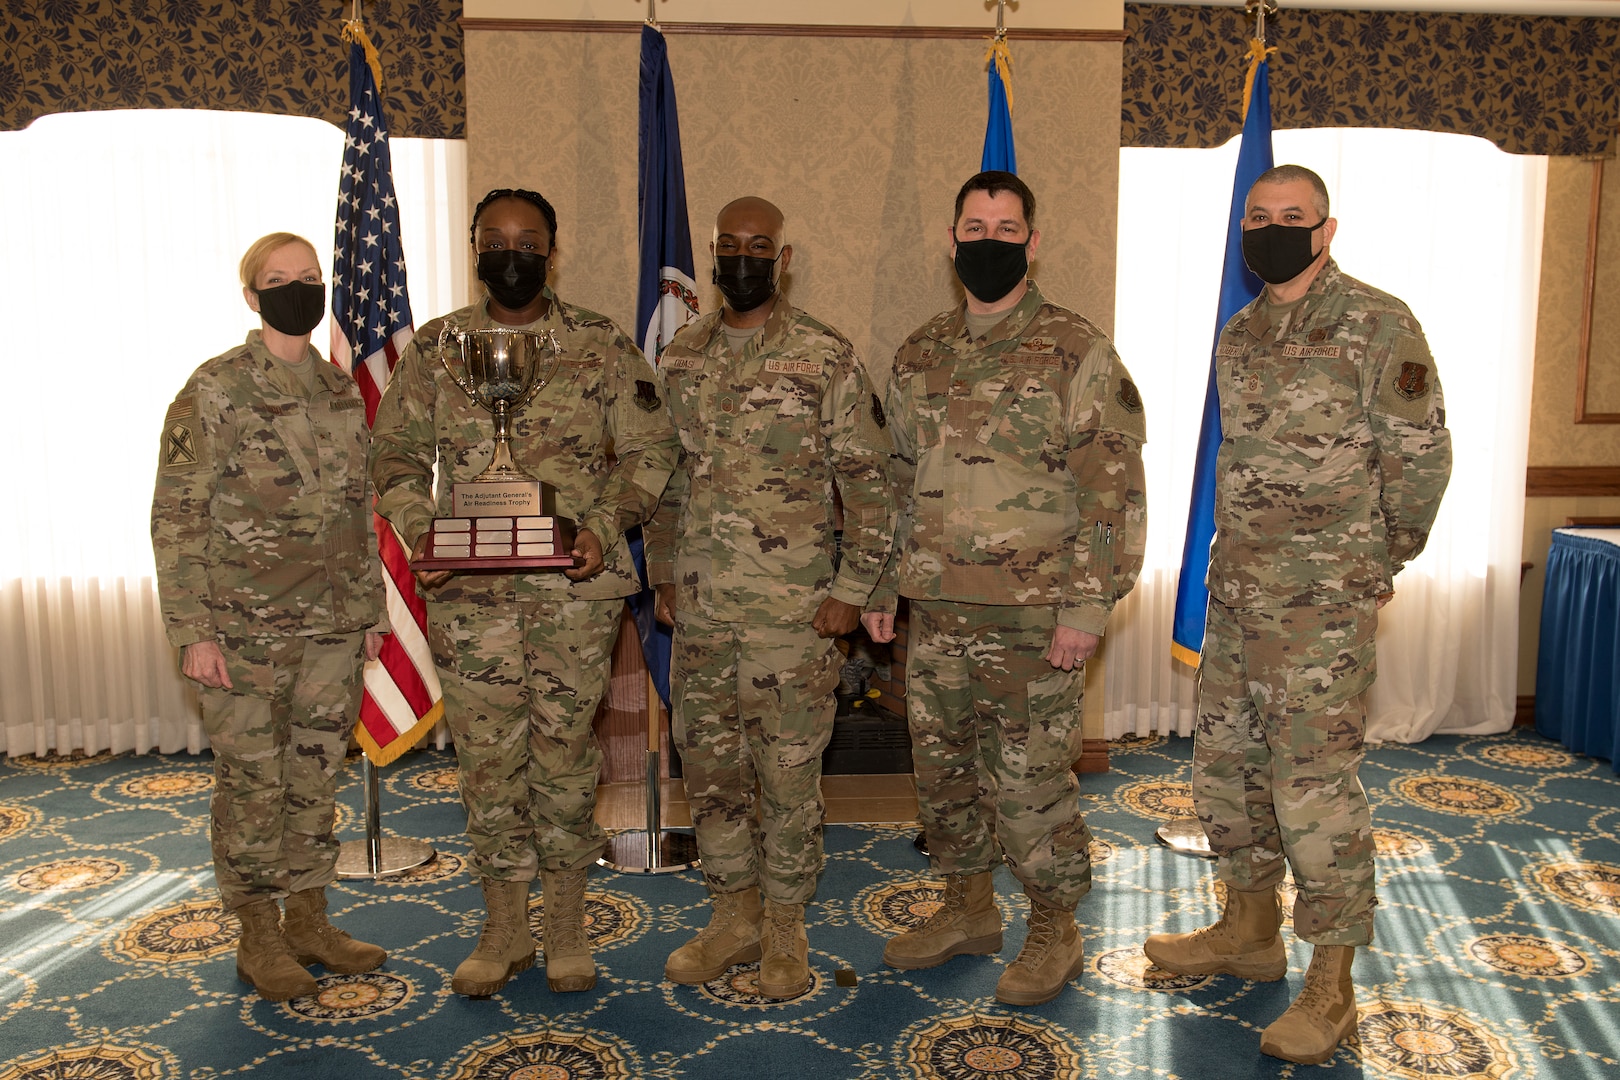 Airman accept a trophy from military leaders during a ceremony